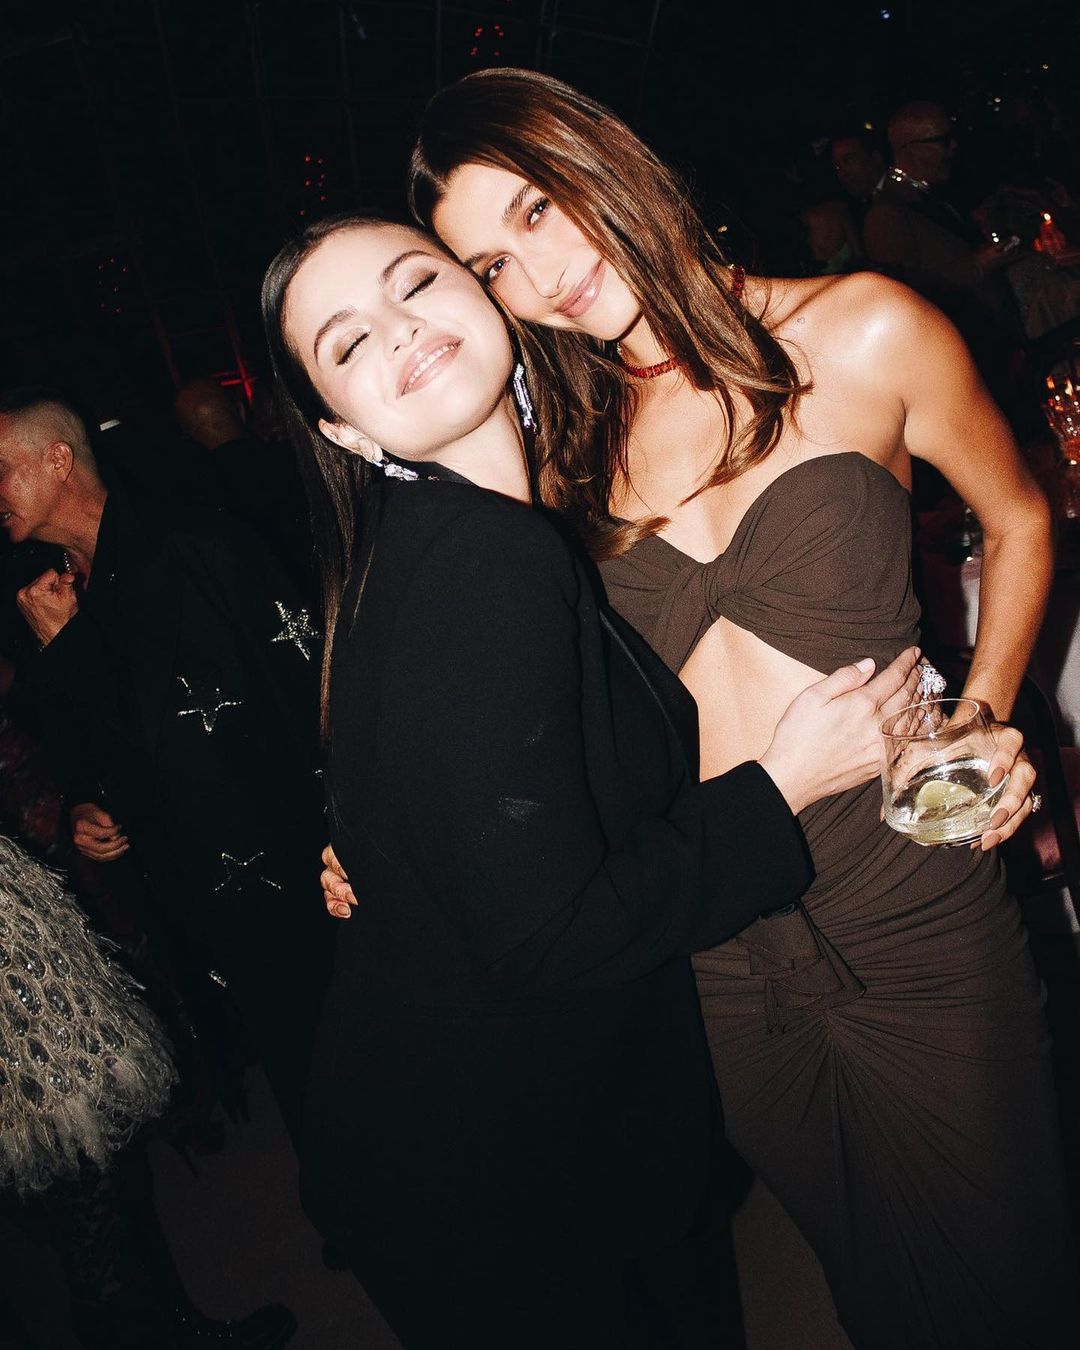 Hailey and Selena have supposedly squashed their beef and were seen posing together at a gala in 2022